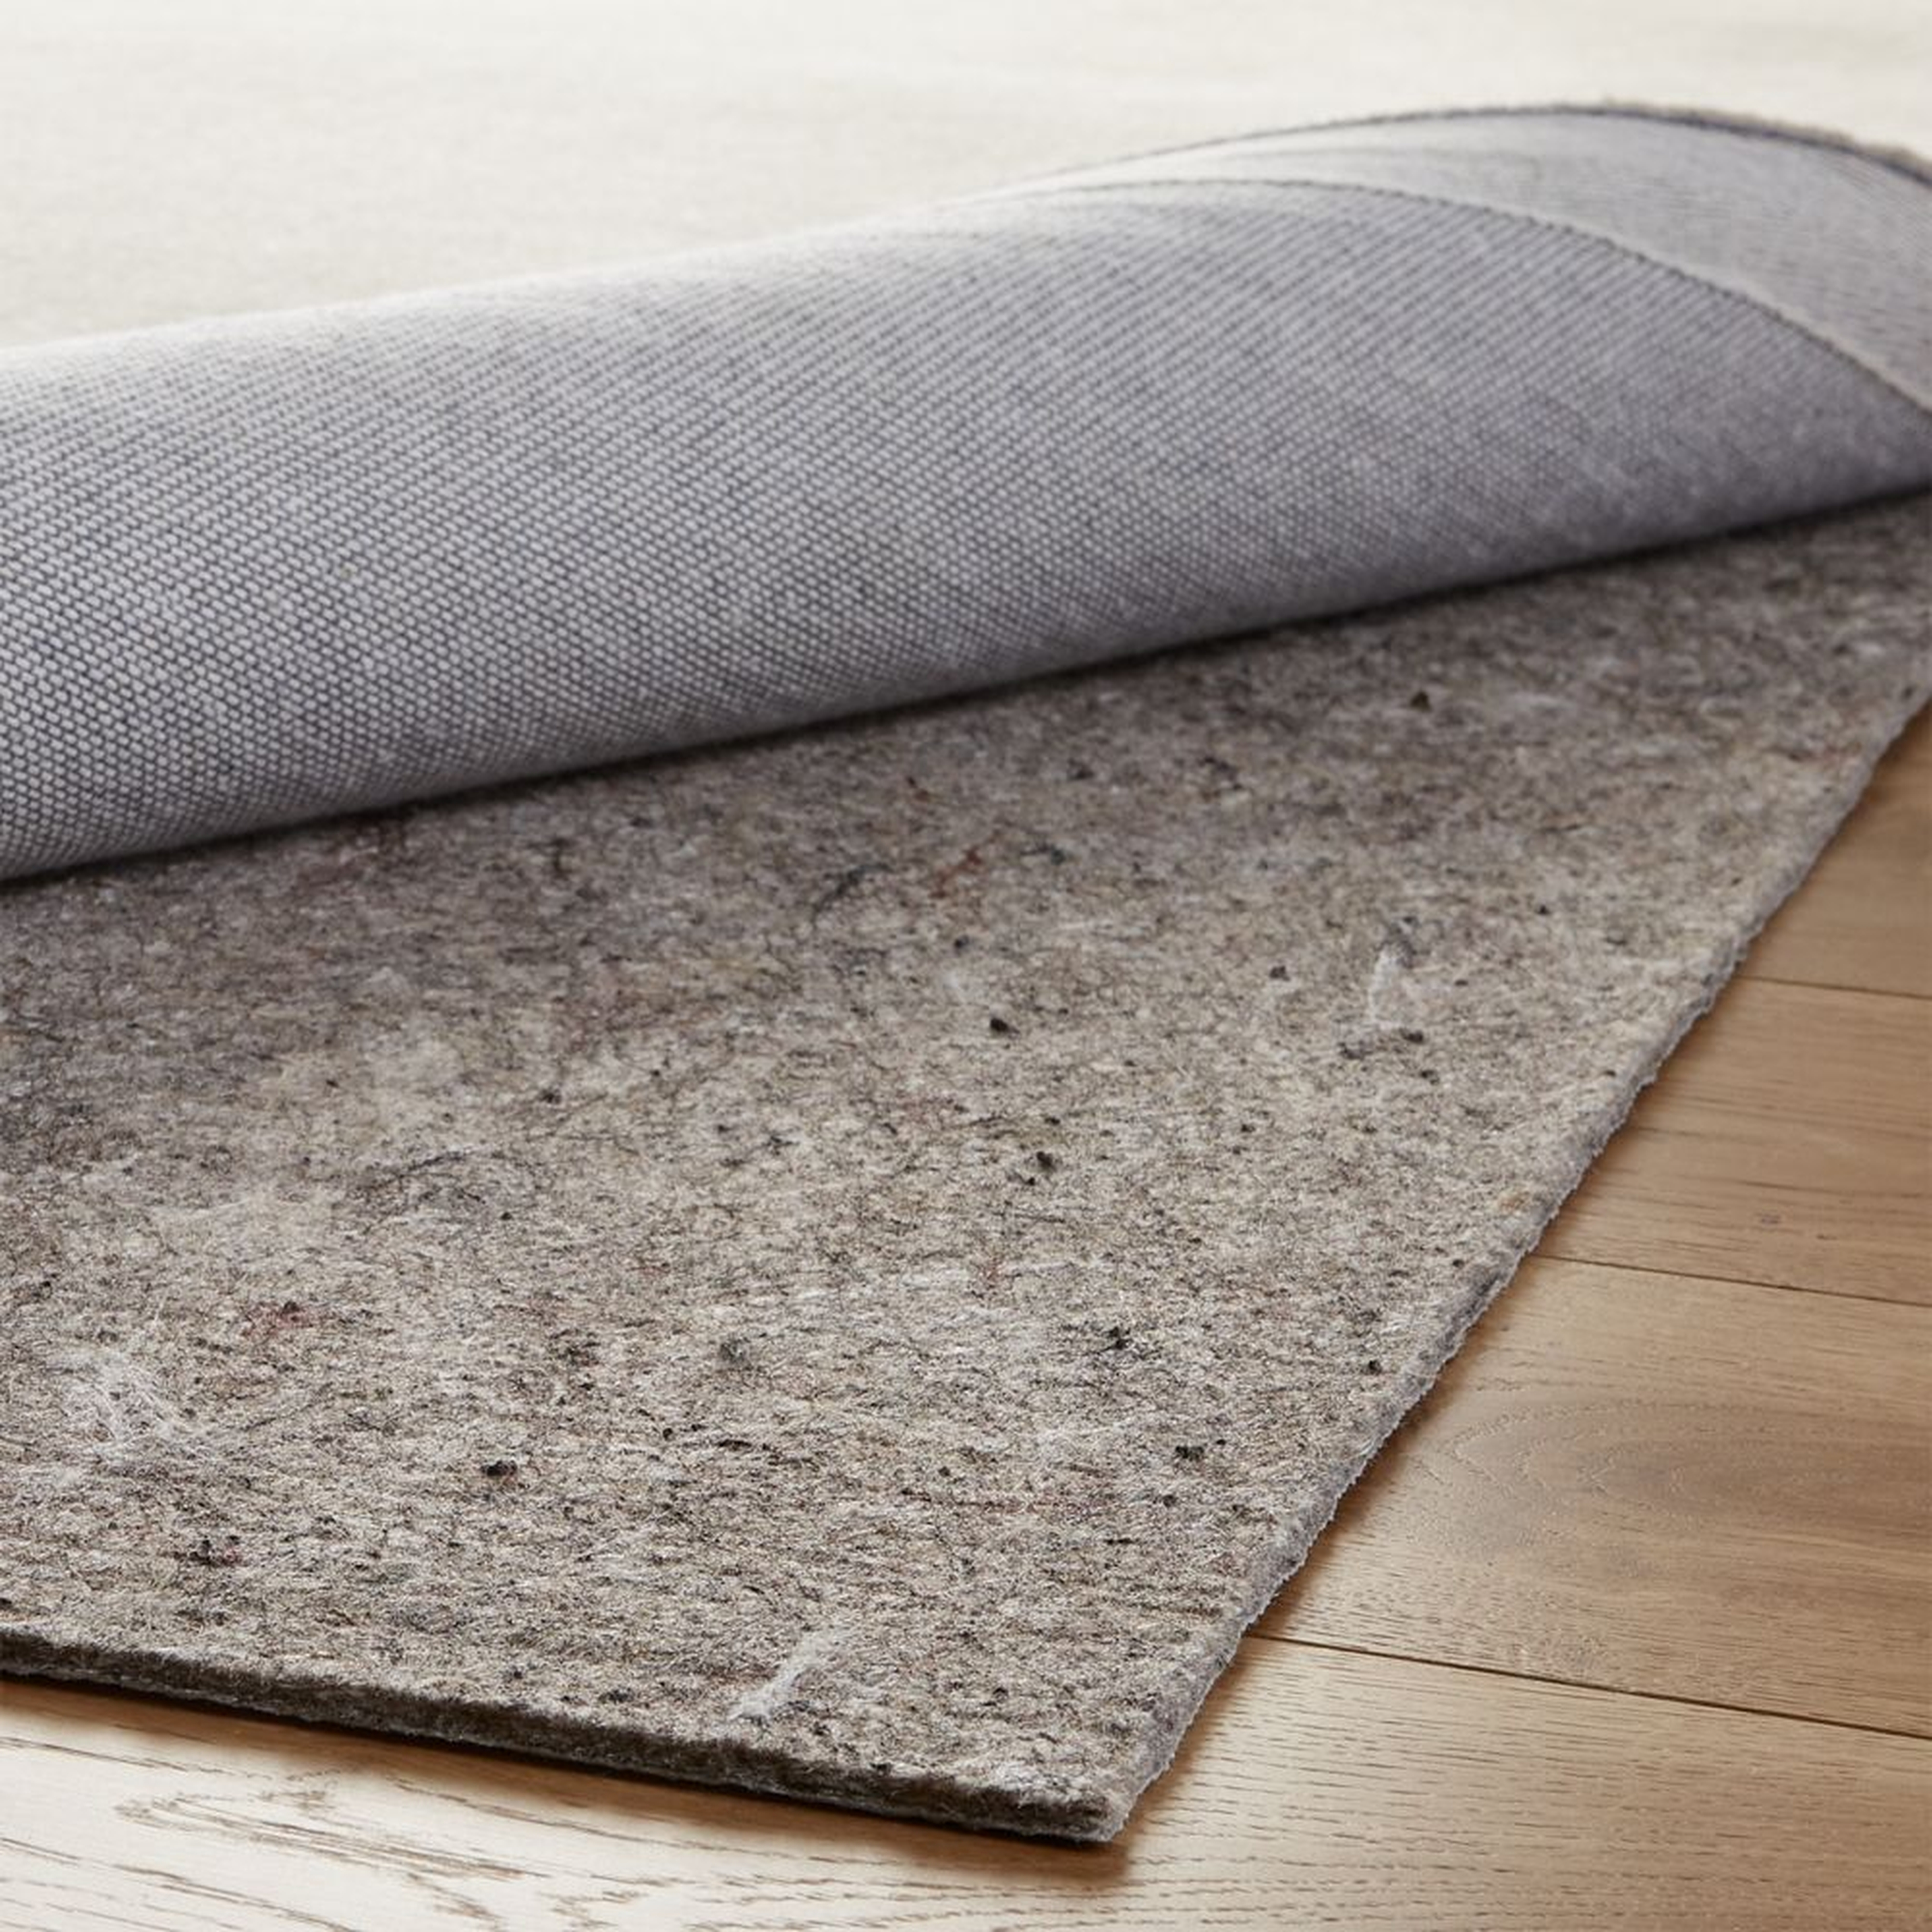 Multisurface 9'x12' Thick Rug Pad - Crate and Barrel